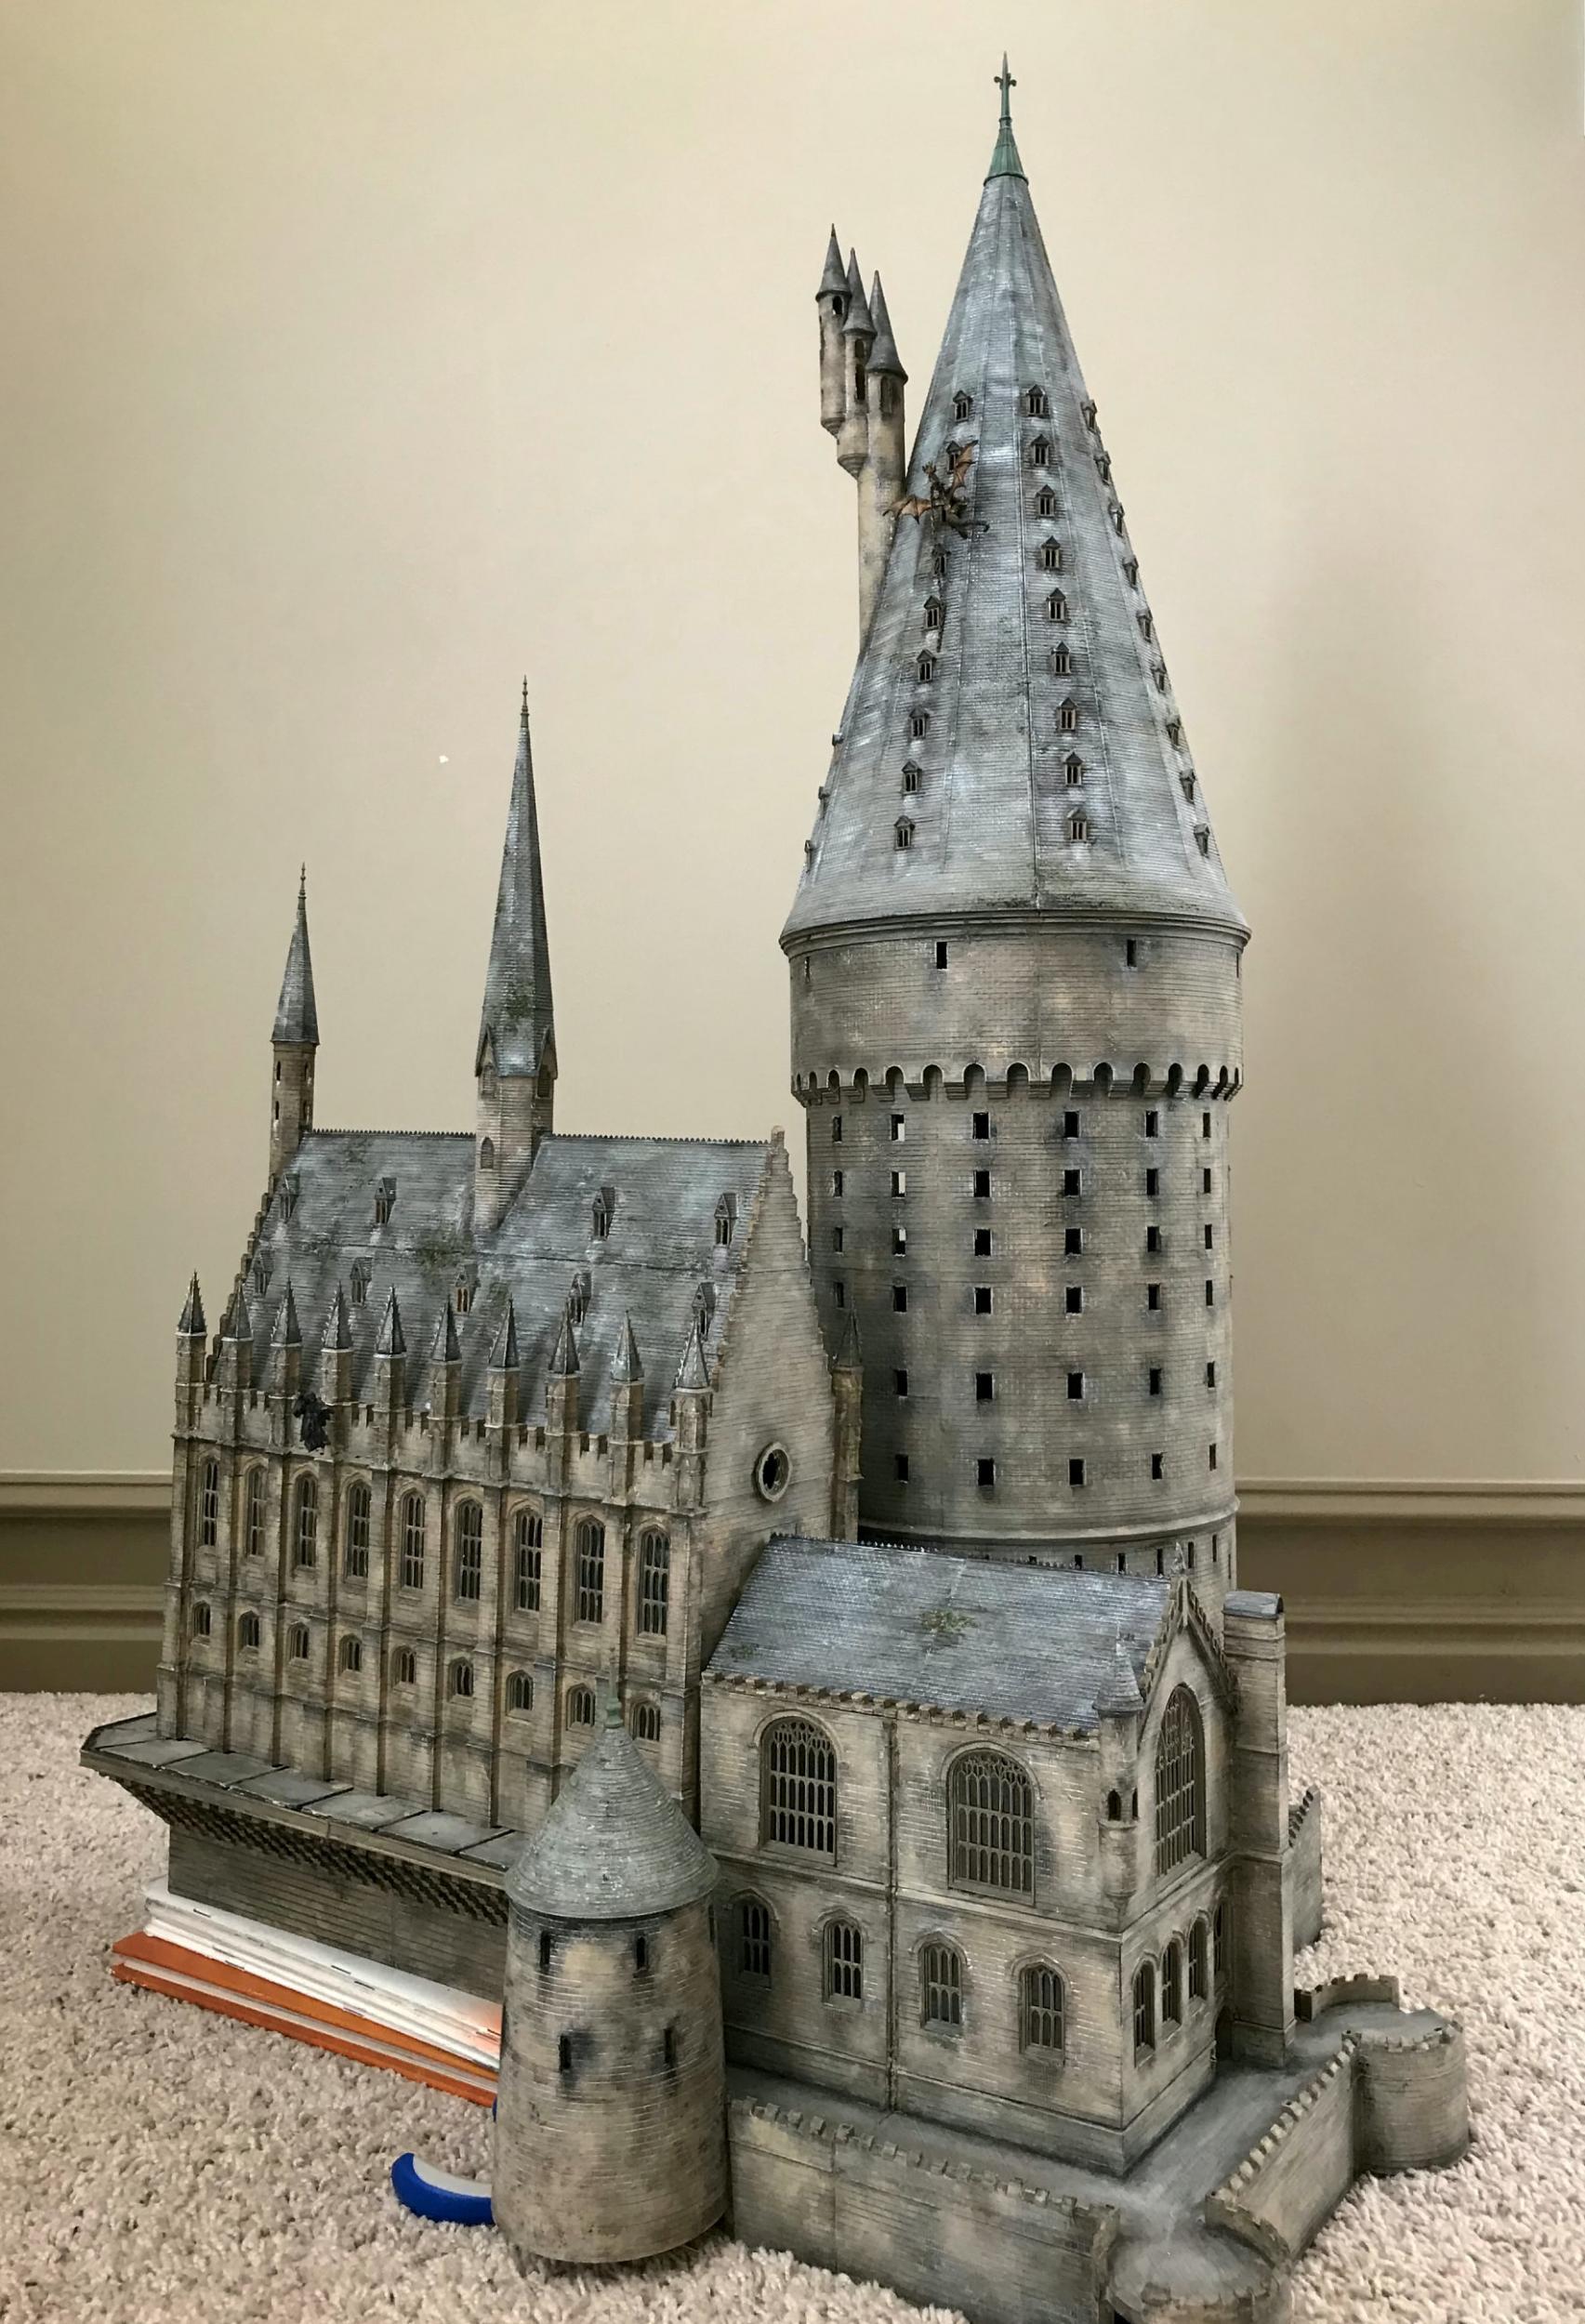 The castle is being built partly with a 3-D printer (SWNS)